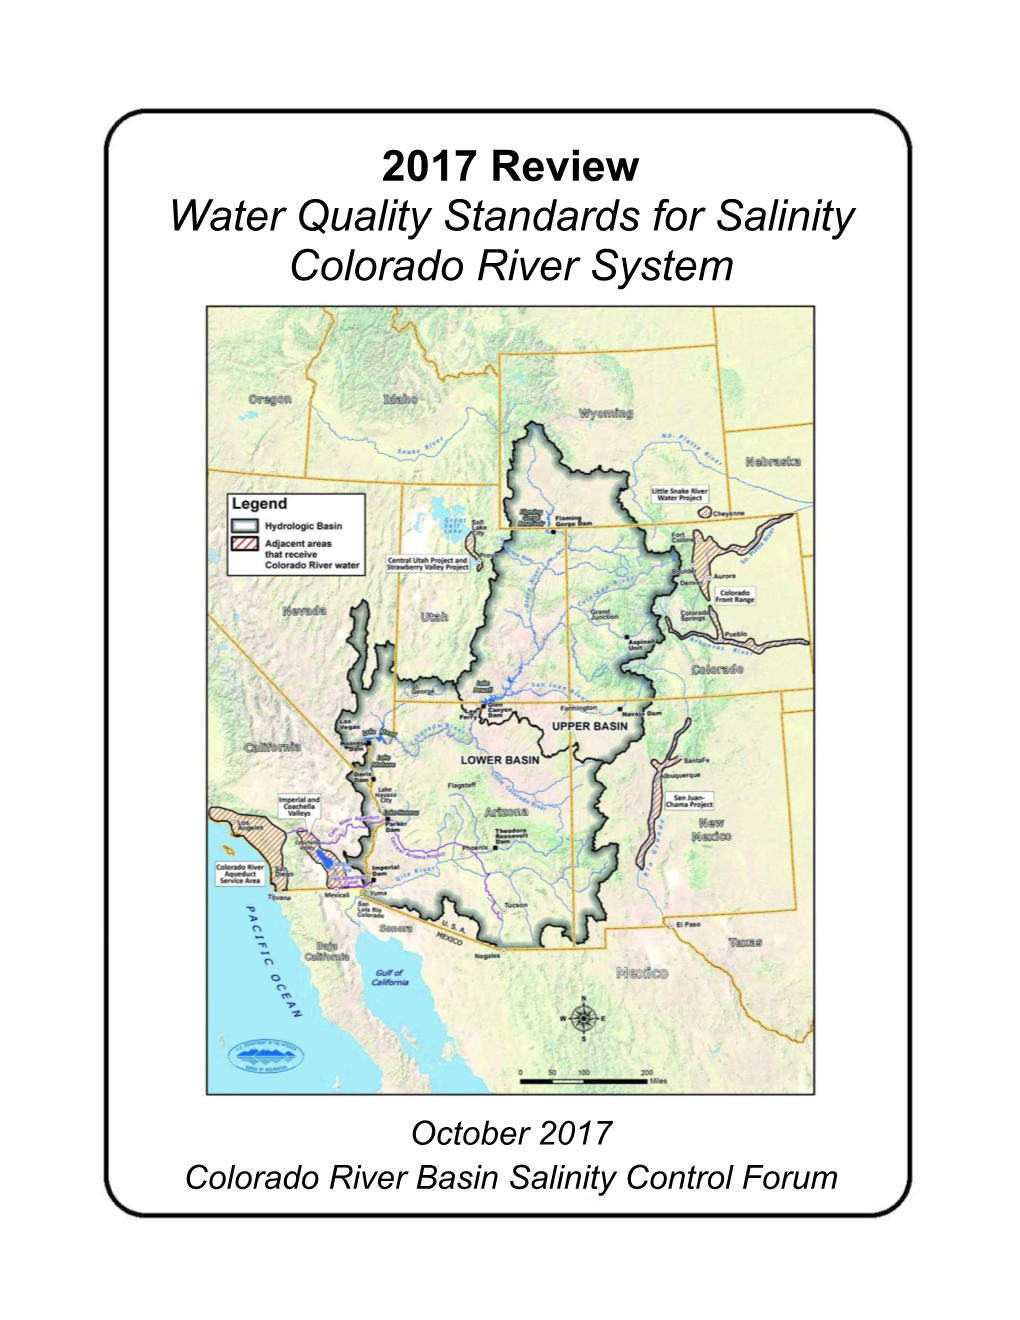 2017 Review Water Quality Standards for Salinity Colorado River System